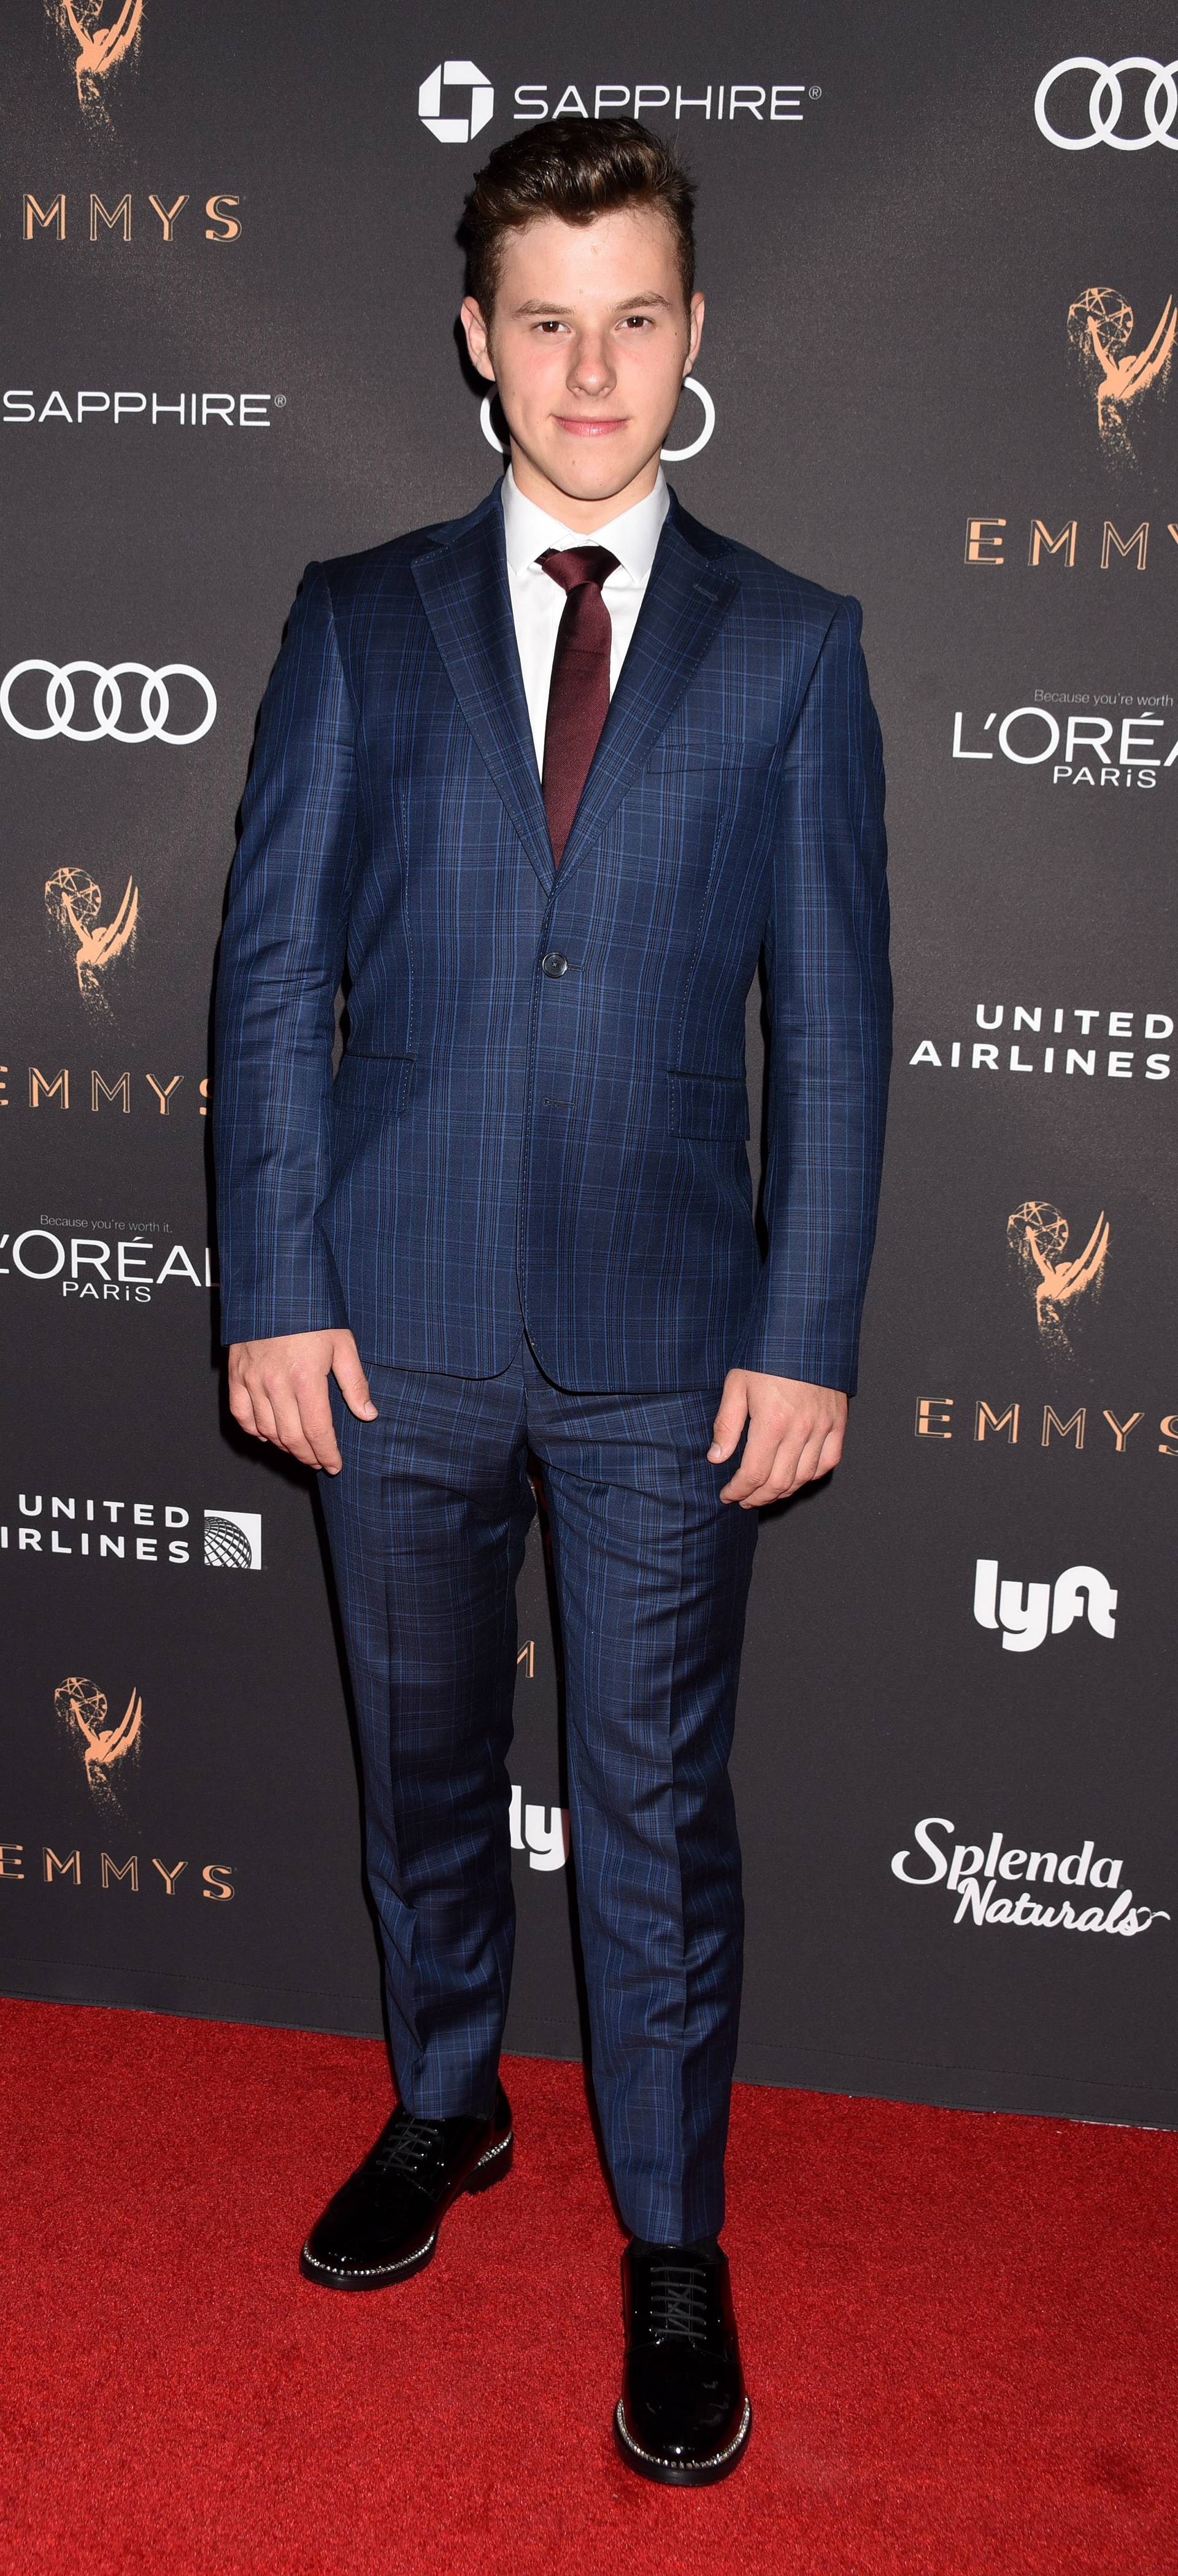 69th Emmy Awards Nominated Performers Reception held at the Wallis Annenberg Center for Performing Arts - Los Angeles